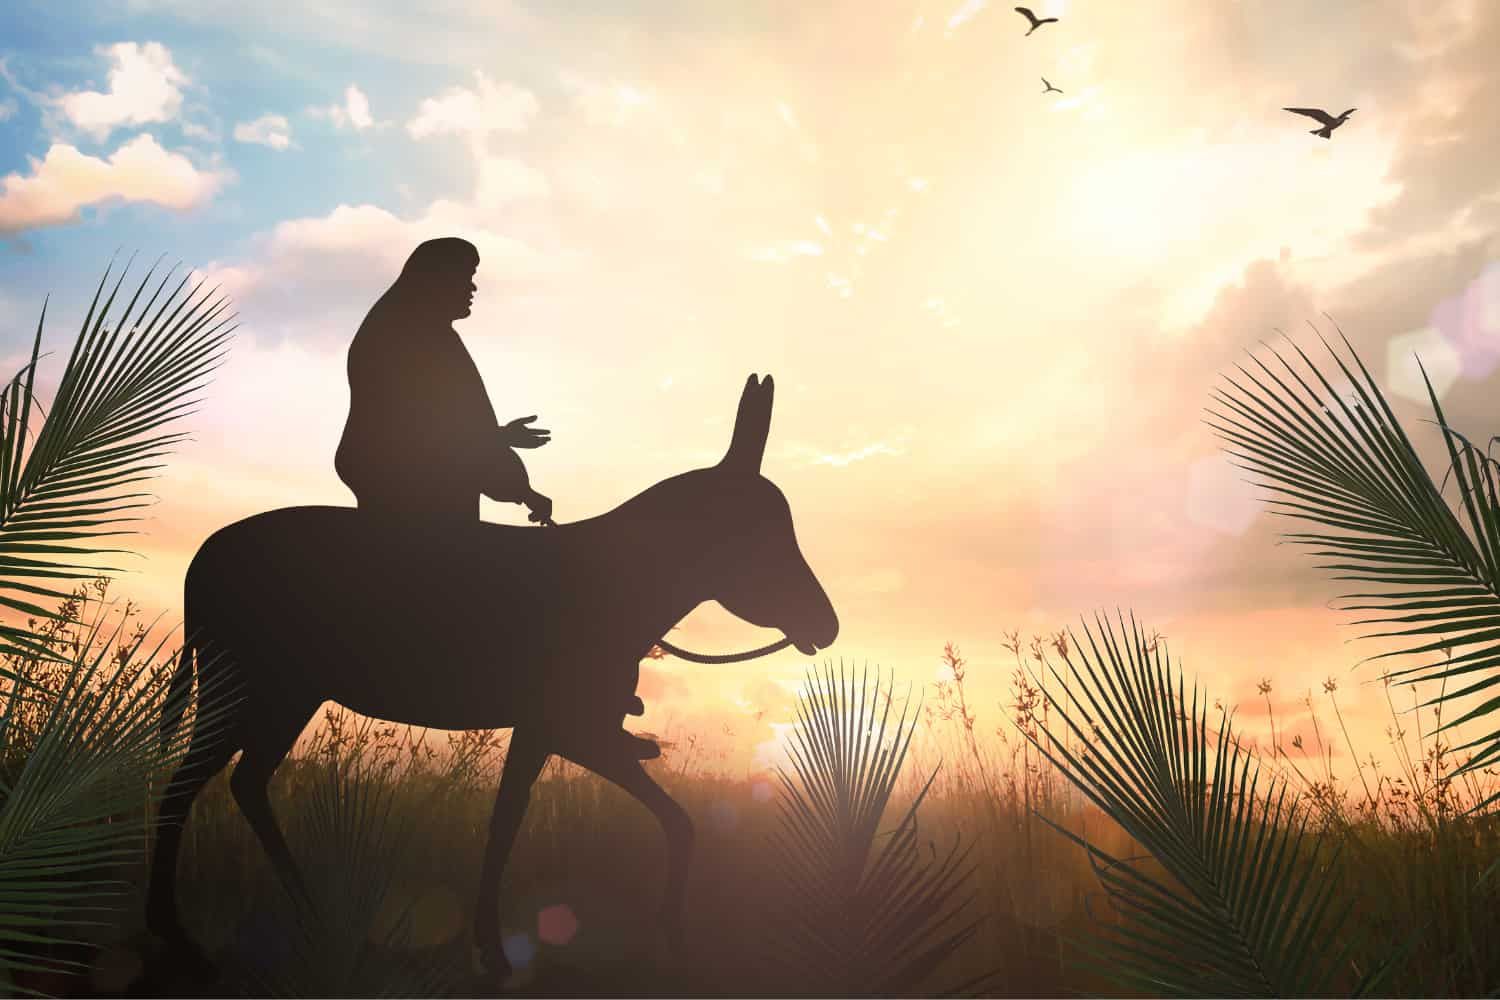 Lesson%20-%20NT%20Easter%2002%20-%20Palm%20Sunday%202%20Humble%20on%20a%20donkey-c3dfbb64 Humility / pride